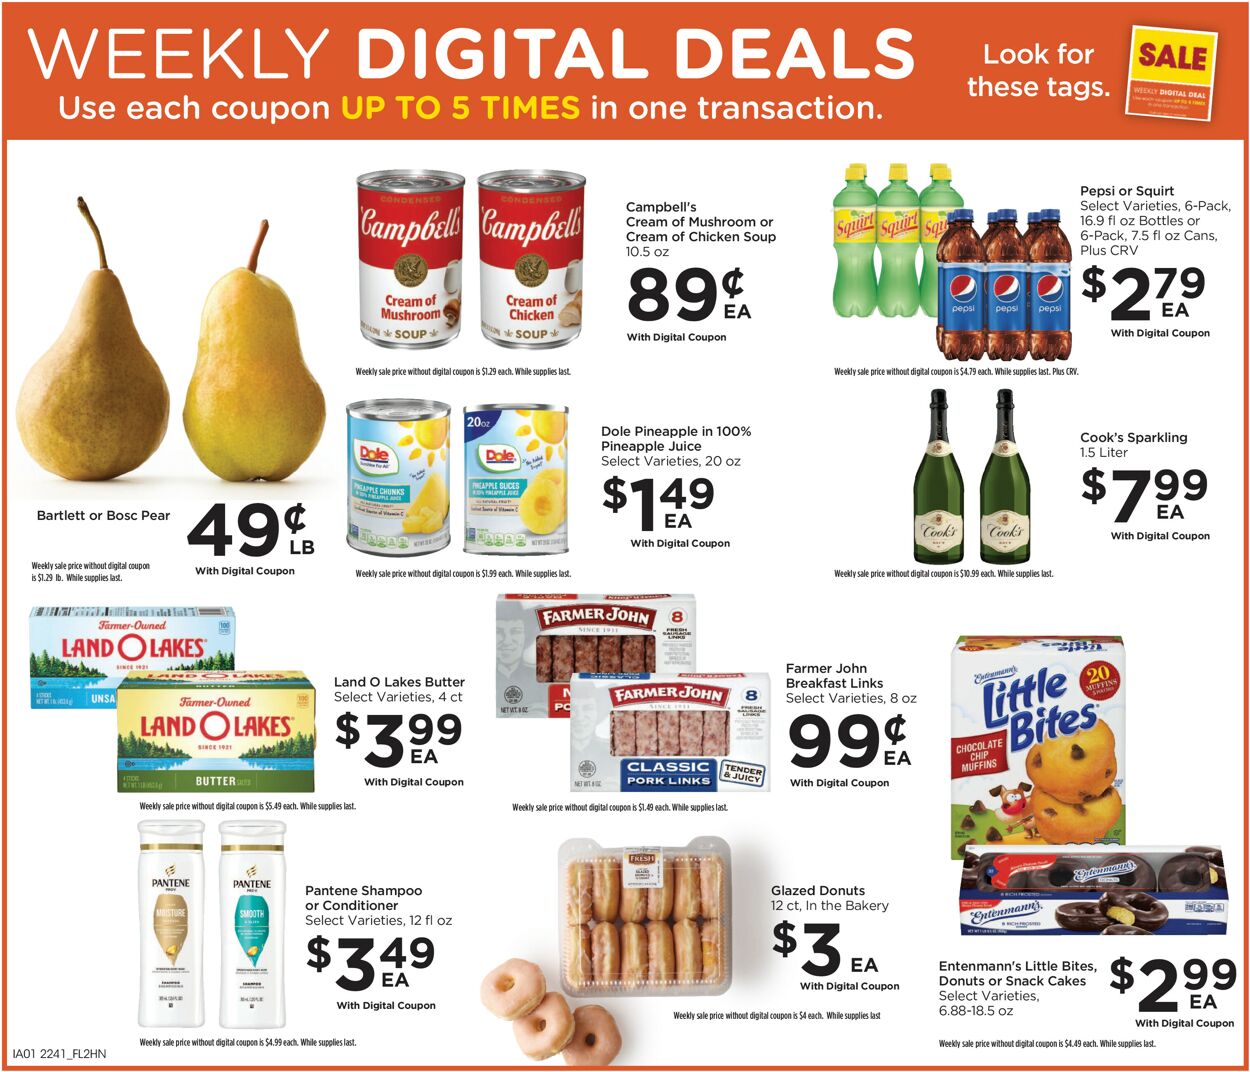 Foods Co. Ad from 11/09/2022